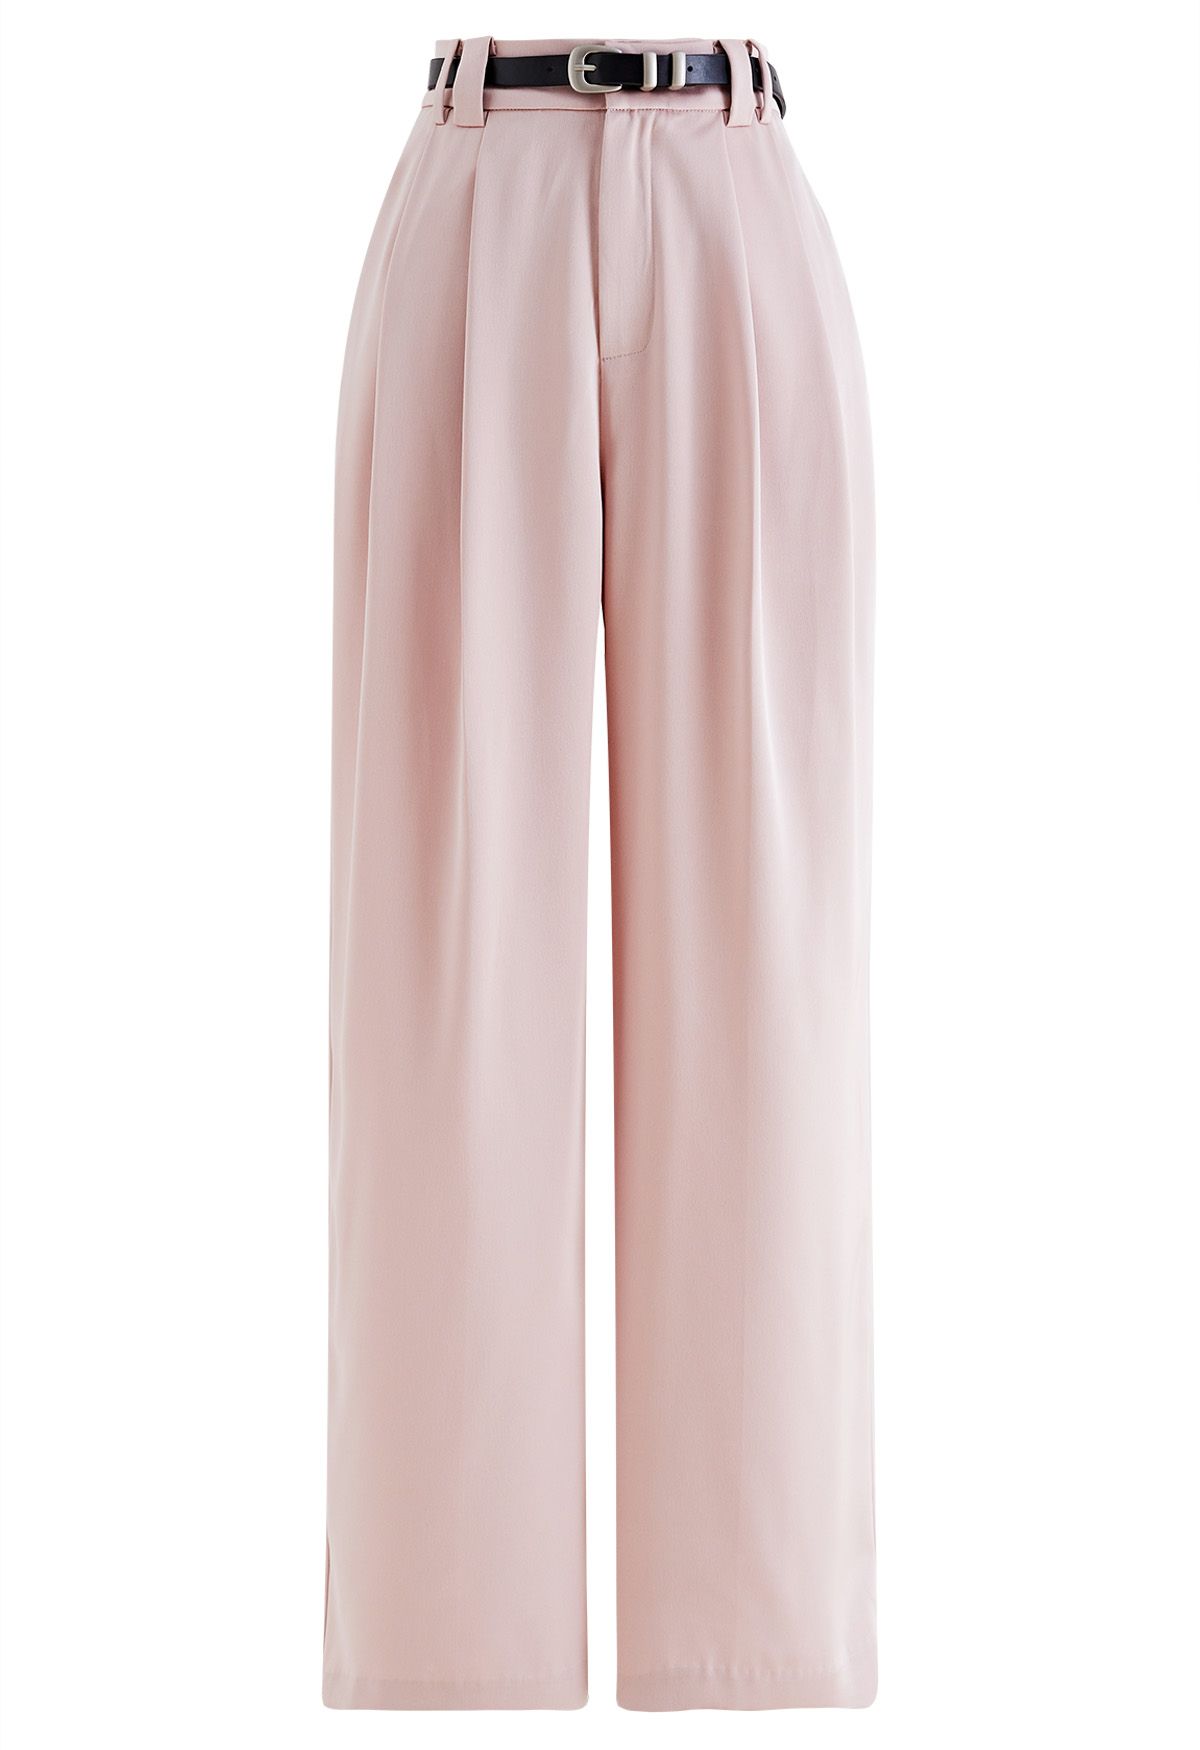 Satin Straight-Leg Pants with Faux Leather Belt in Pink